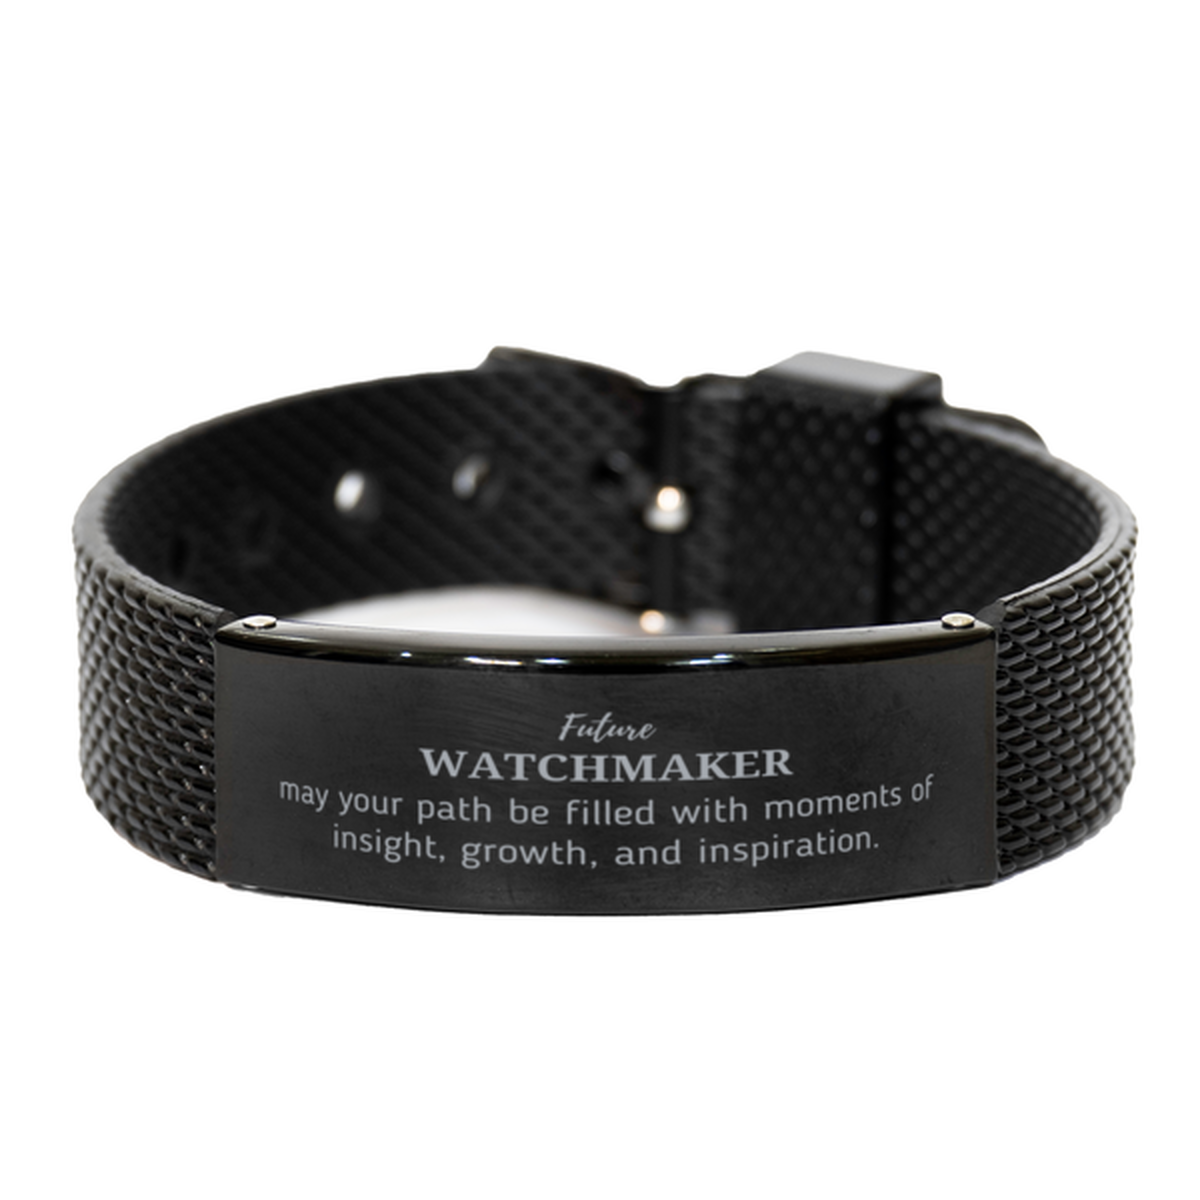 Future Watchmaker Gifts, May your path be filled with moments of insight, Graduation Gifts for New Watchmaker, Christmas Unique Black Shark Mesh Bracelet For Men, Women, Friends